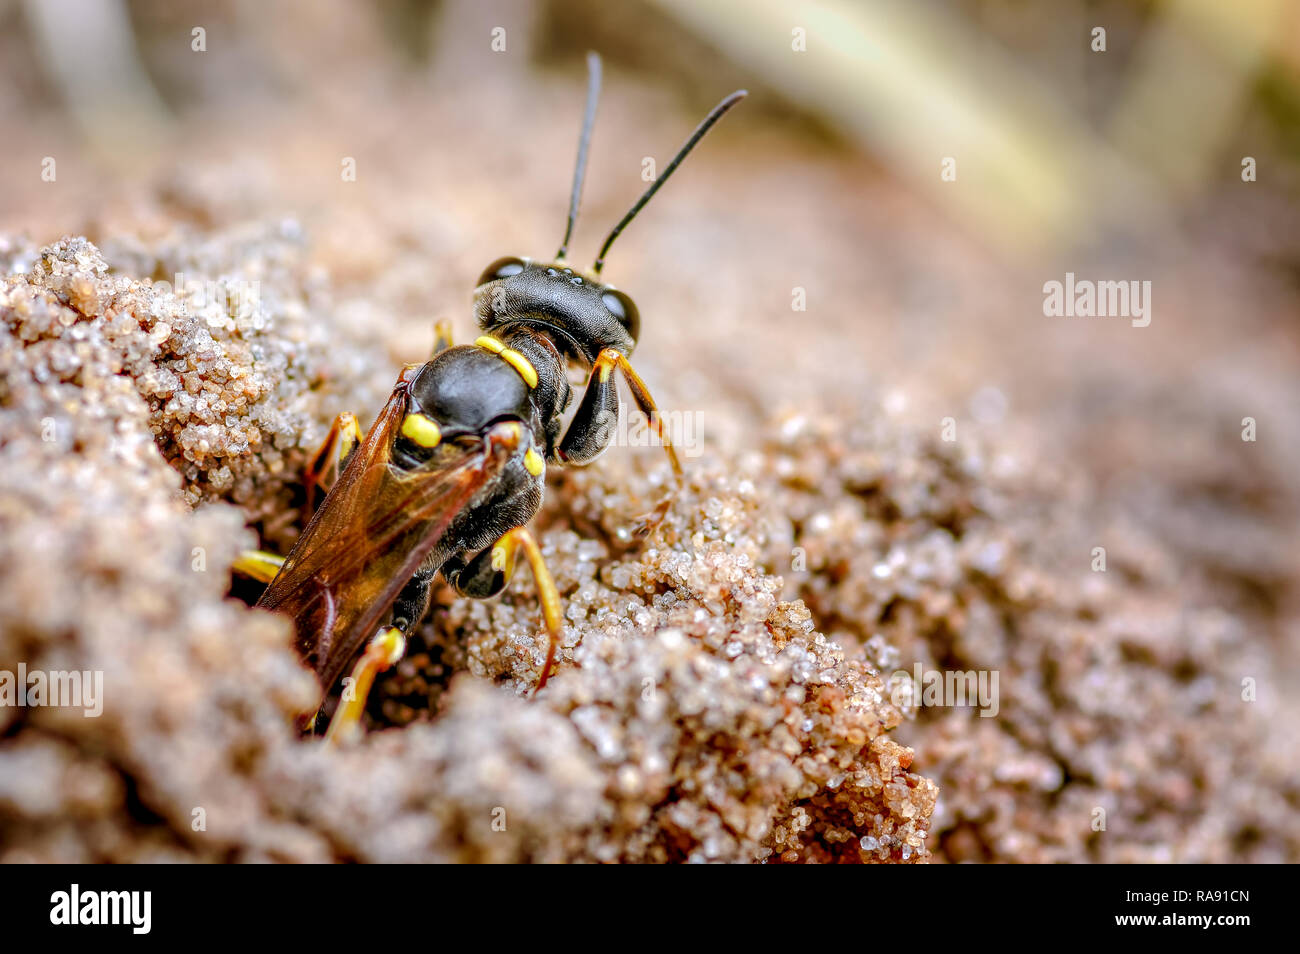 This is the field digger wasp, Mellinus arvensis in our rear garden, September. The wasp hunts for a range of flies for their larval brood cells. Stock Photo